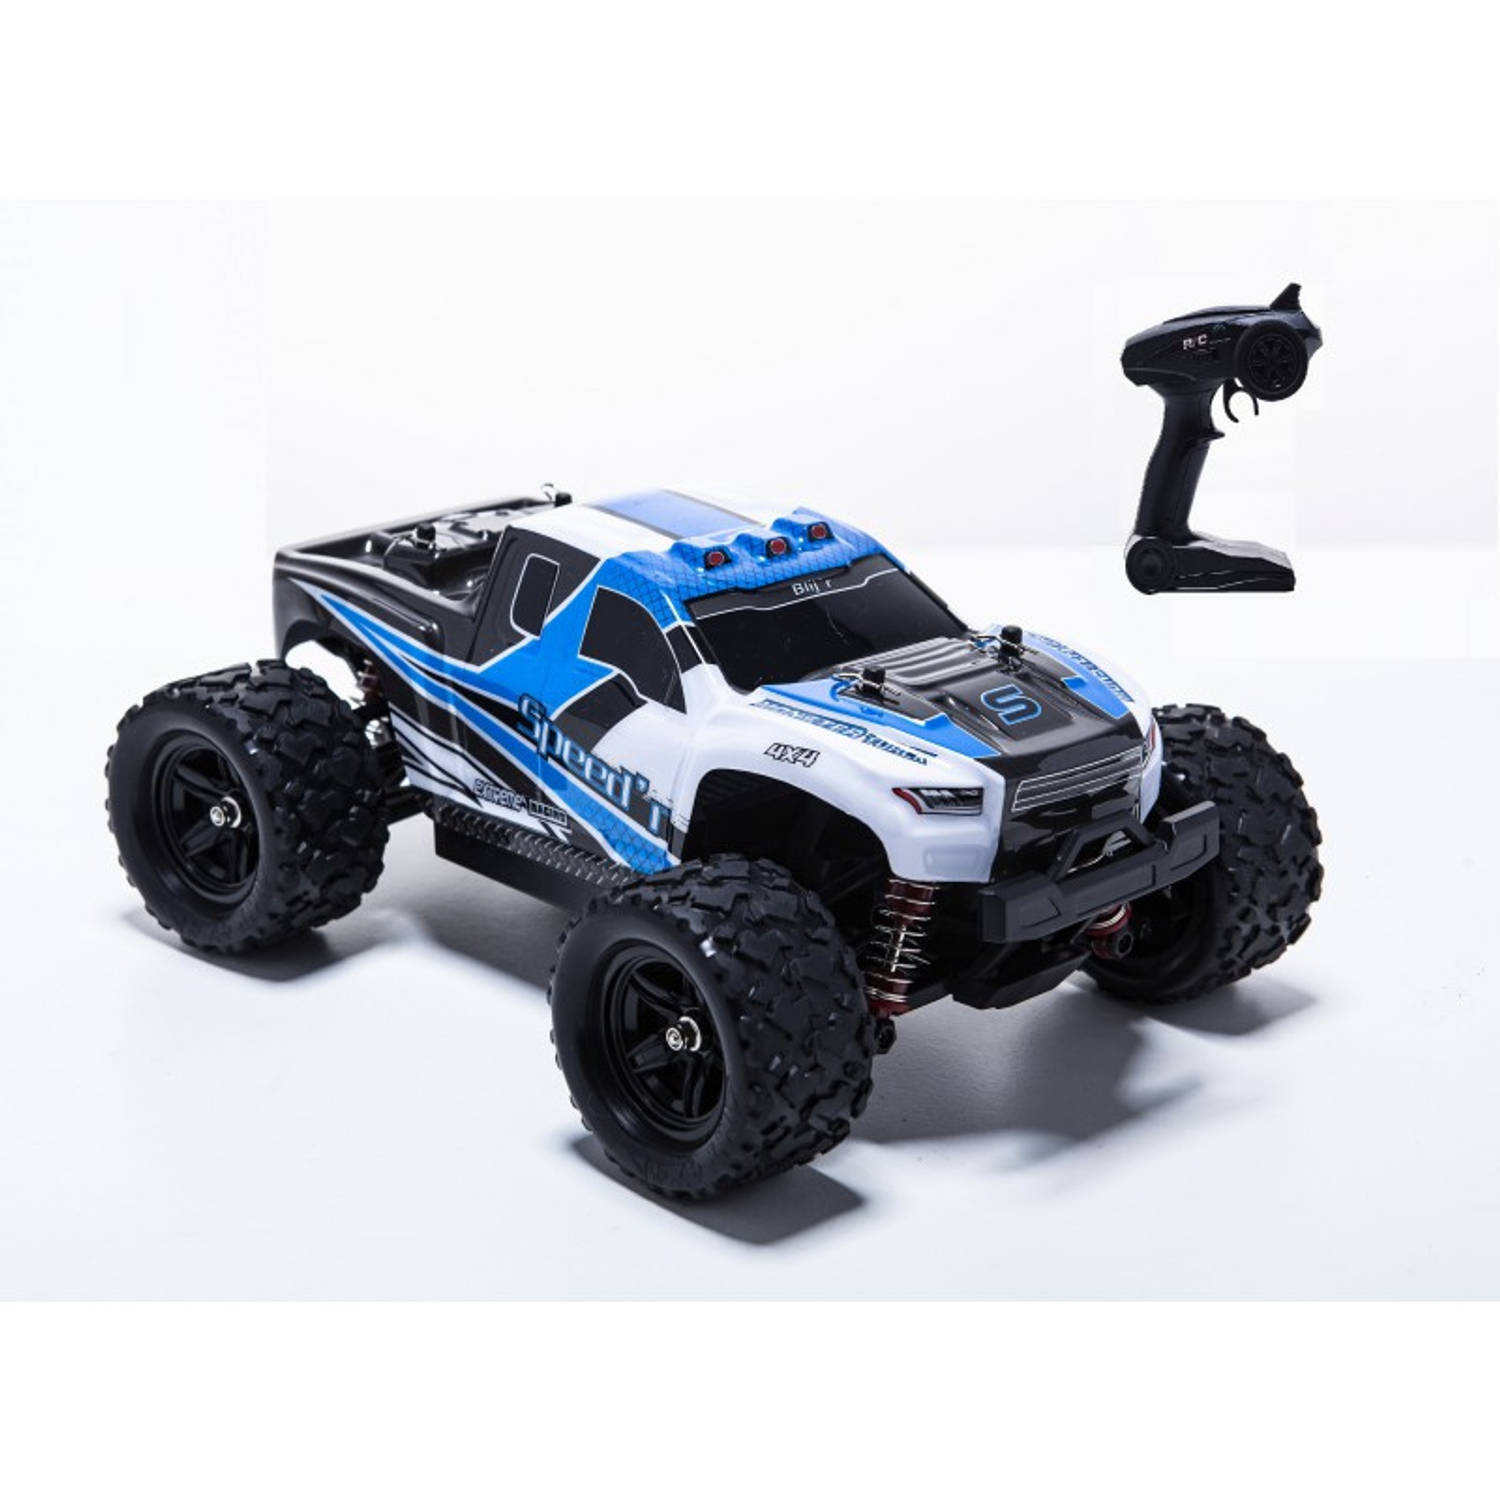 Blij'R Speed'r - RC Monster Truck 1:18 4WD RTR met extra accu 40km/h - Blauw